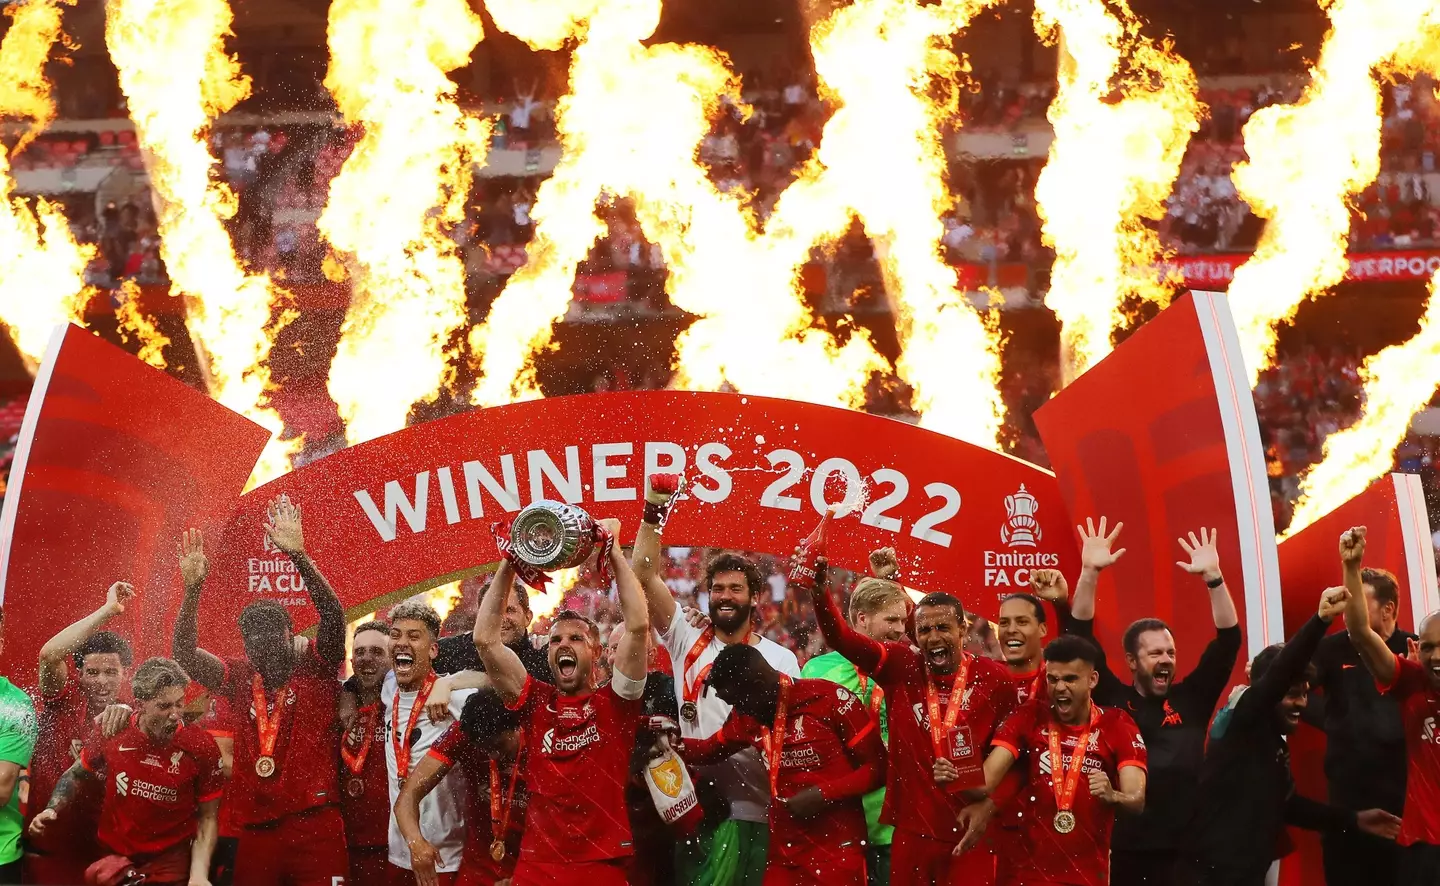 Liverpool picked up their 62nd trophy by beating Chelsea in the FA Cup final. Image: PA Images